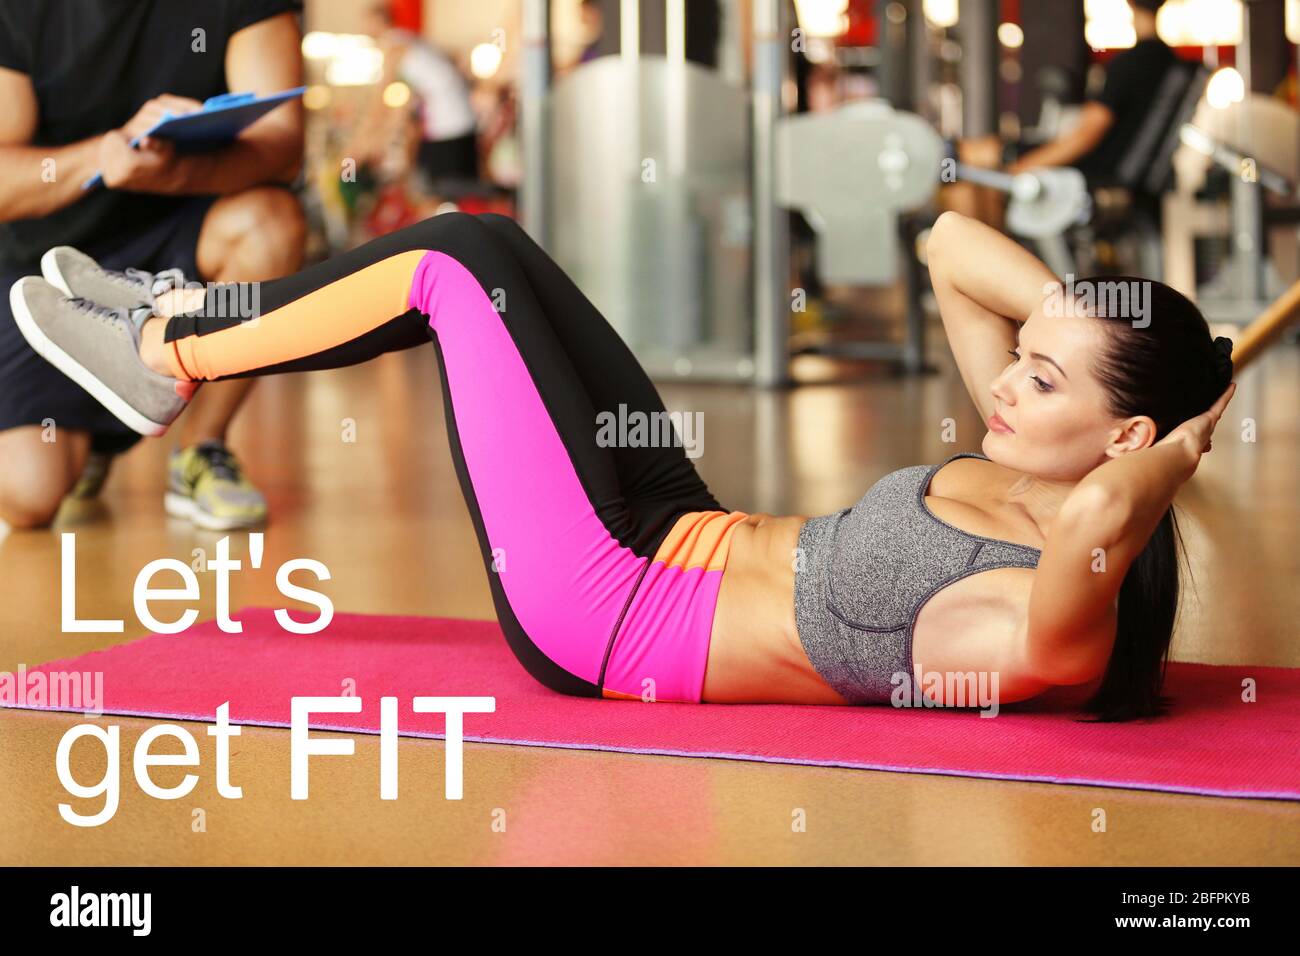 Fitness quotes. Text LET'S GET FIT on background. Young woman training in gym Stock Photo